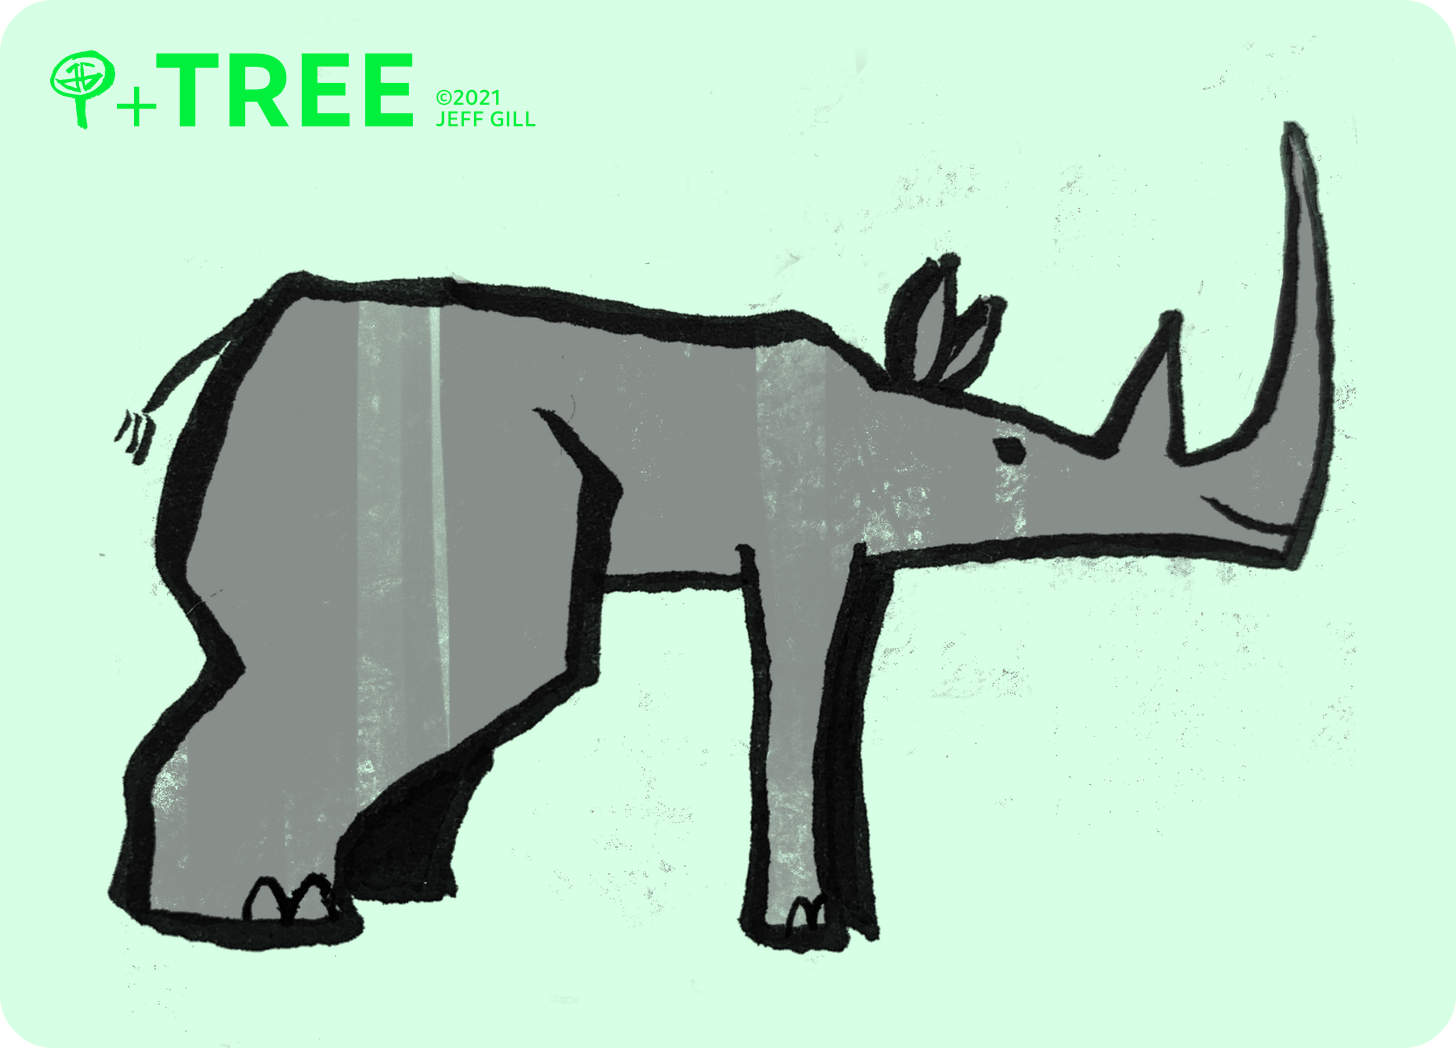 An illustration of a rhinoceros with extremely large and strong back legs